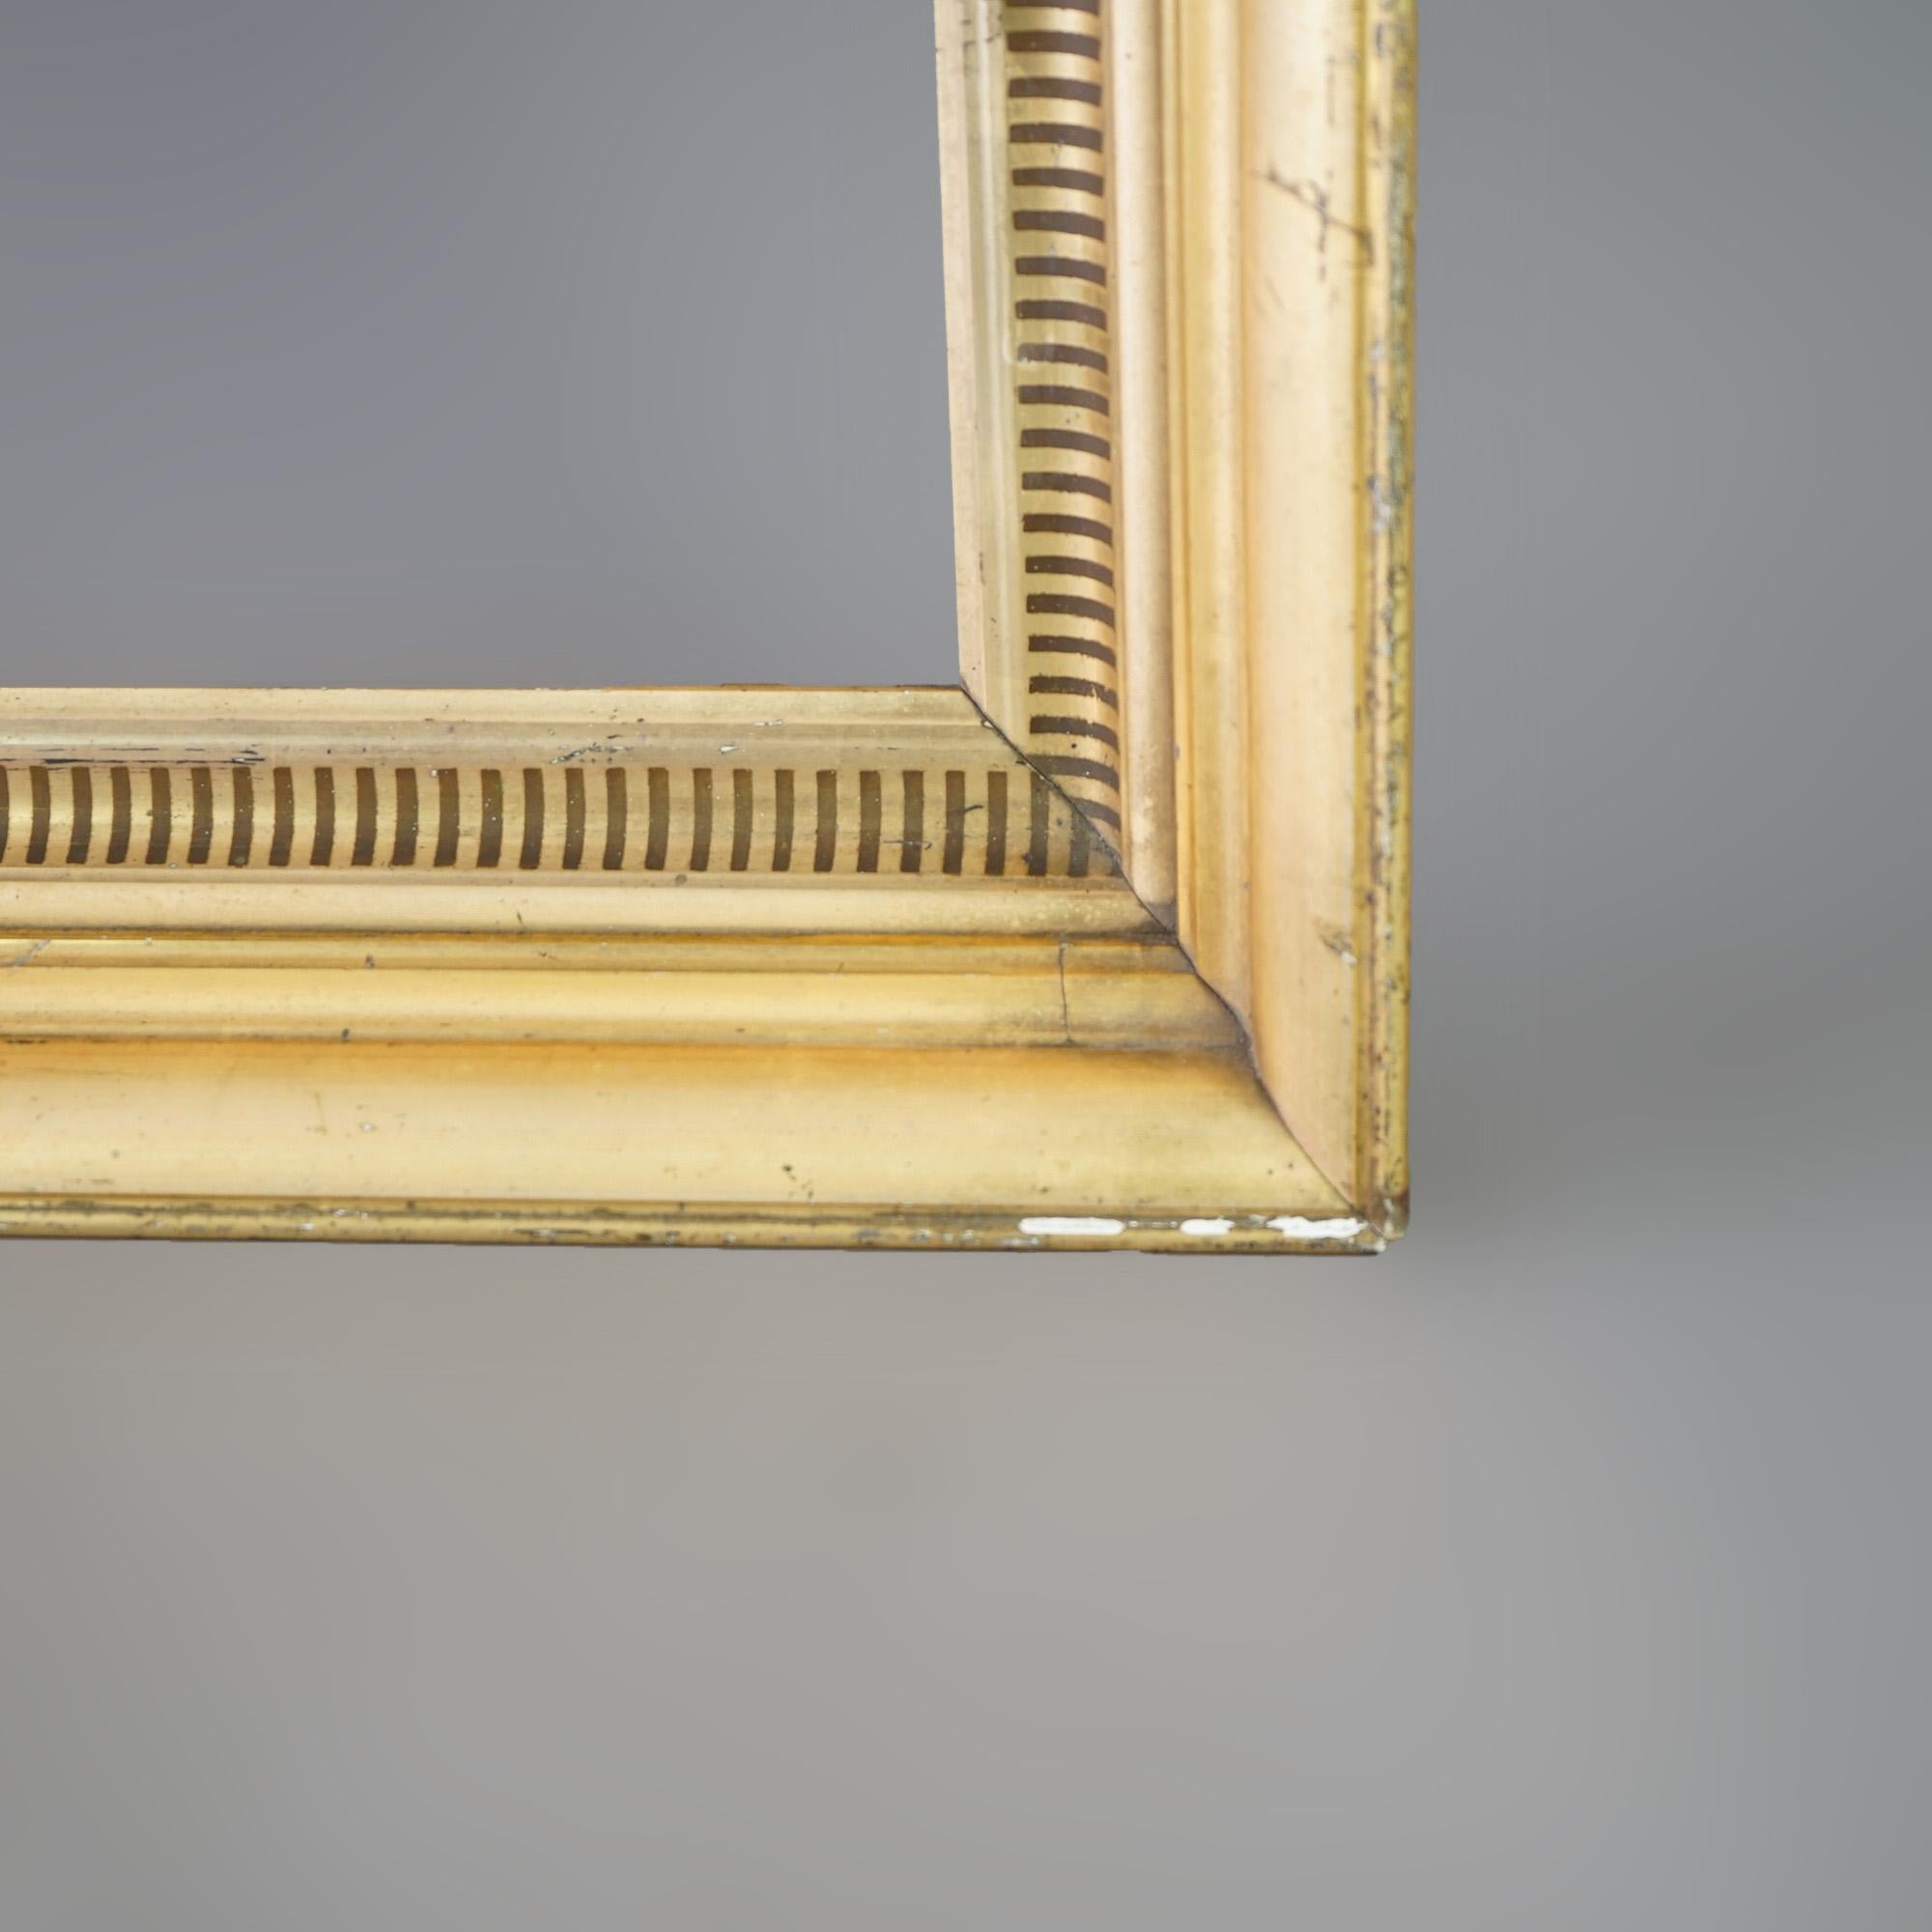 An Antique First Finish Giltwood Art Display Frame Circa 1840

Measures - 19.25